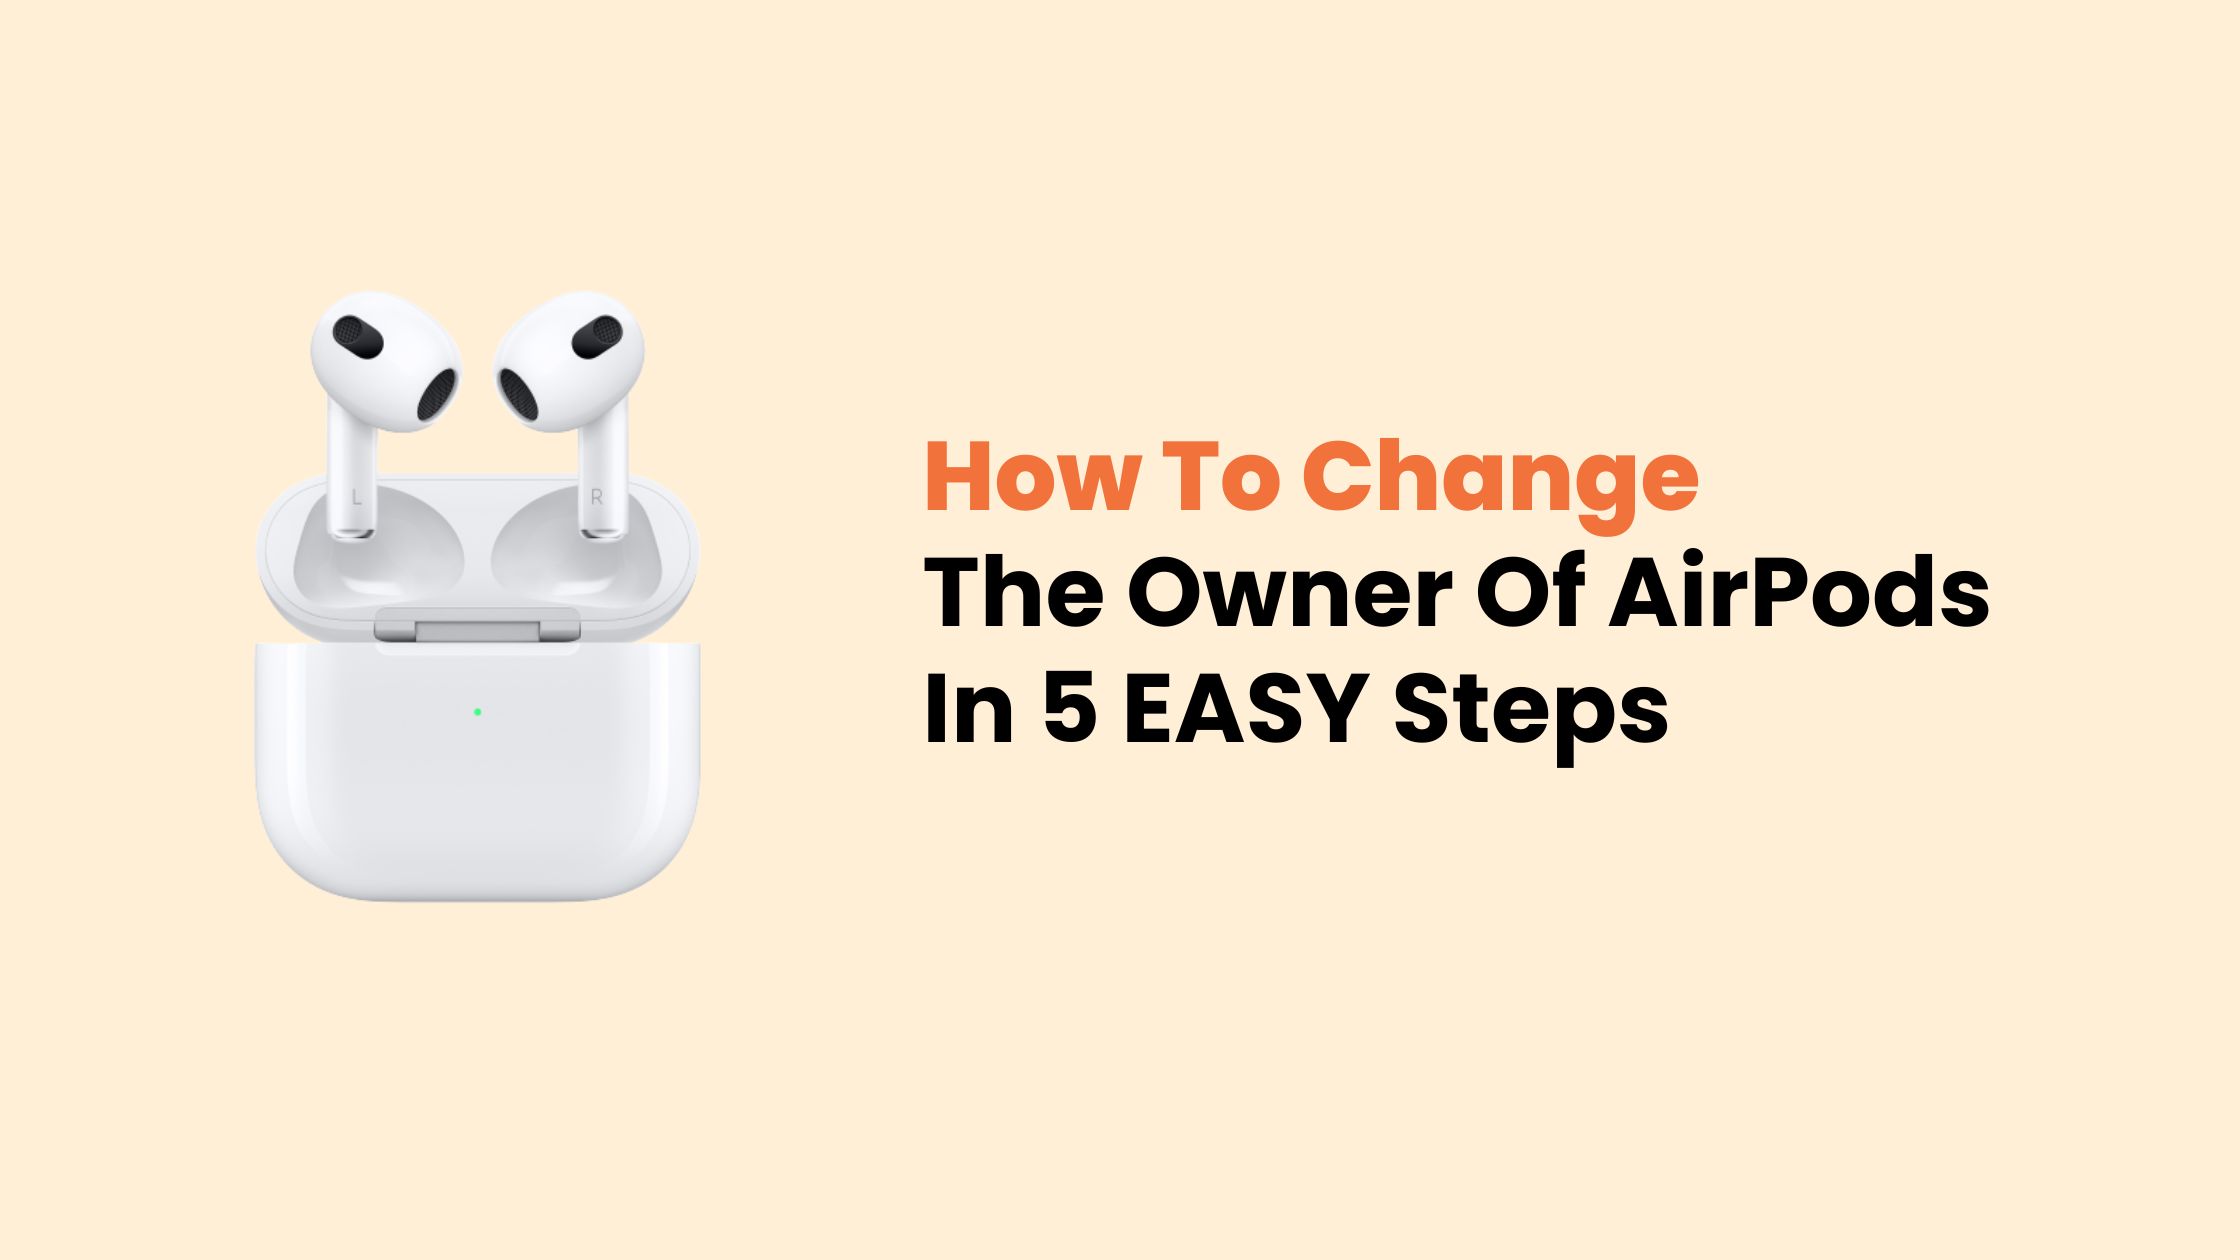 How To Change The Owner Of AirPods In 5 EASY Steps